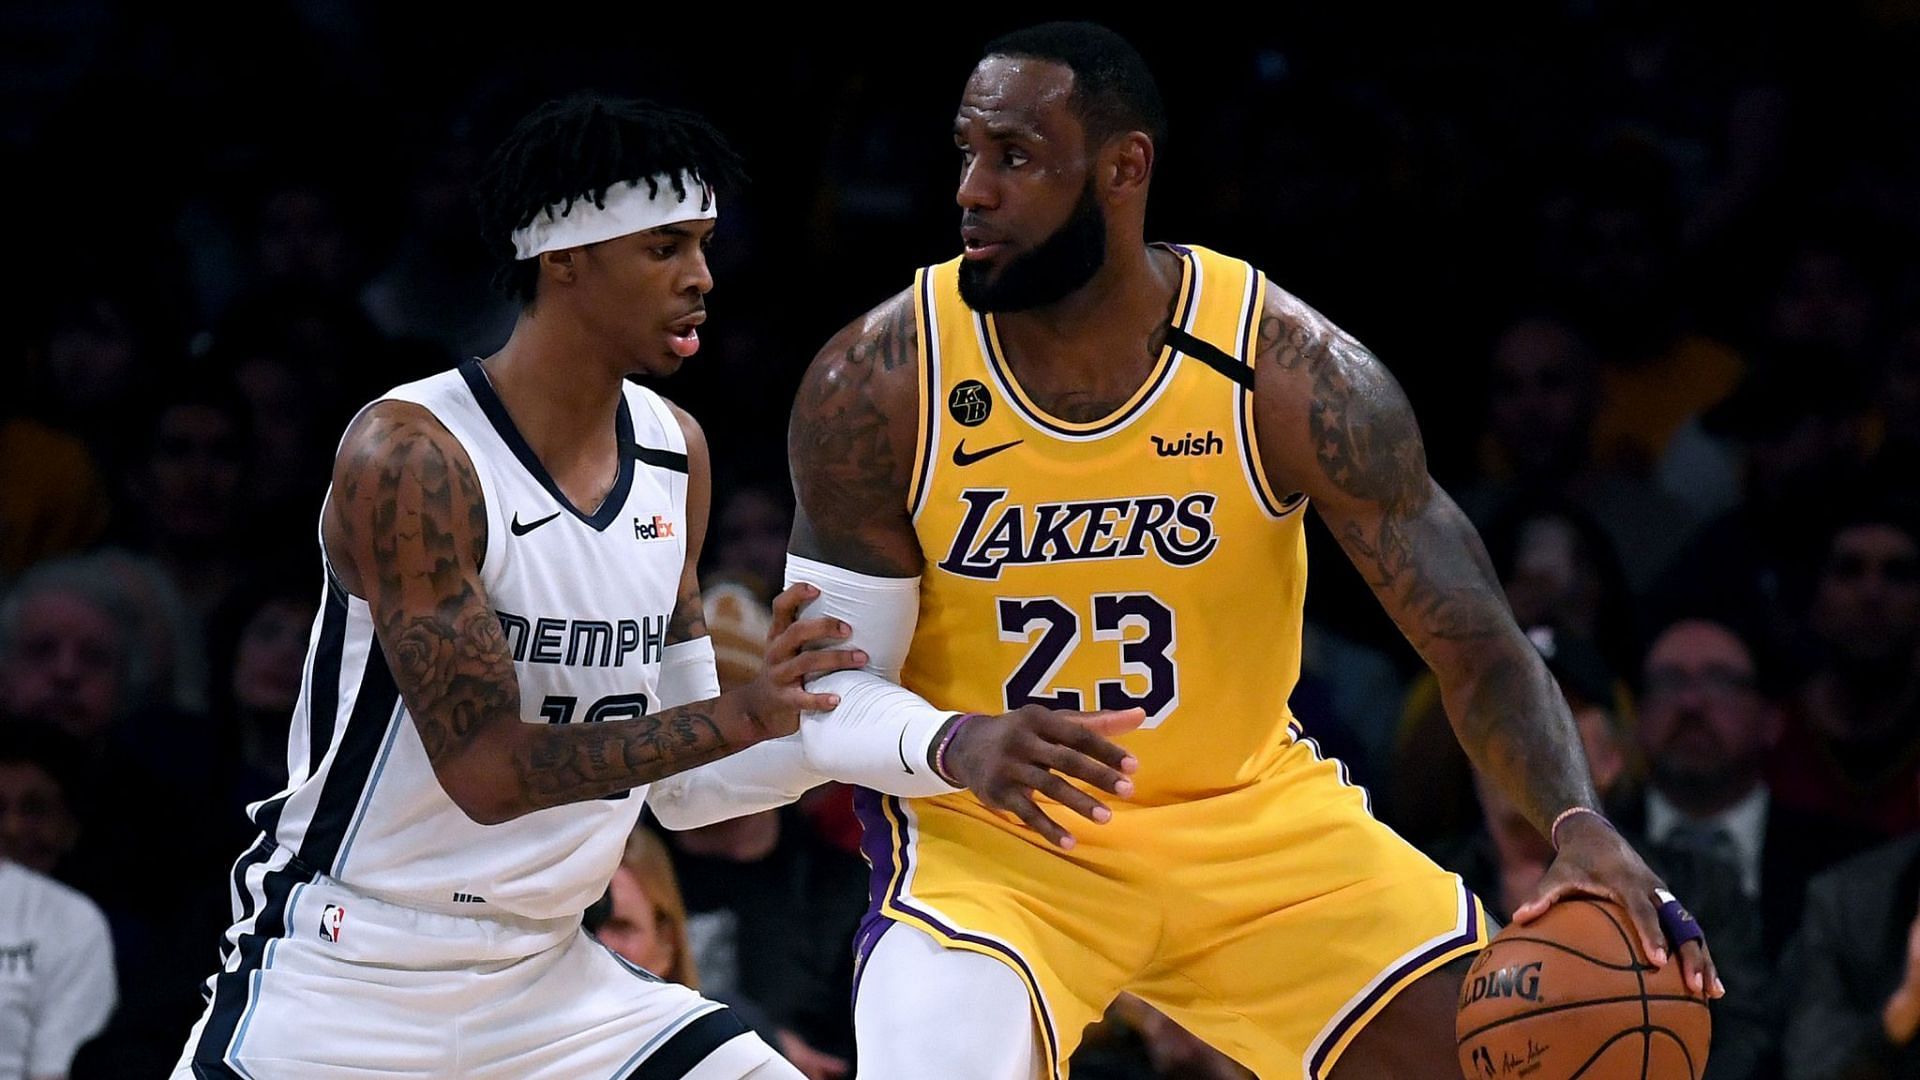 Ja Morant led the Memphis Grizzlies comeback win over LeBron James&#039; LA Lakers in their last meeting a few days ago. [Photo: Sky Sports]